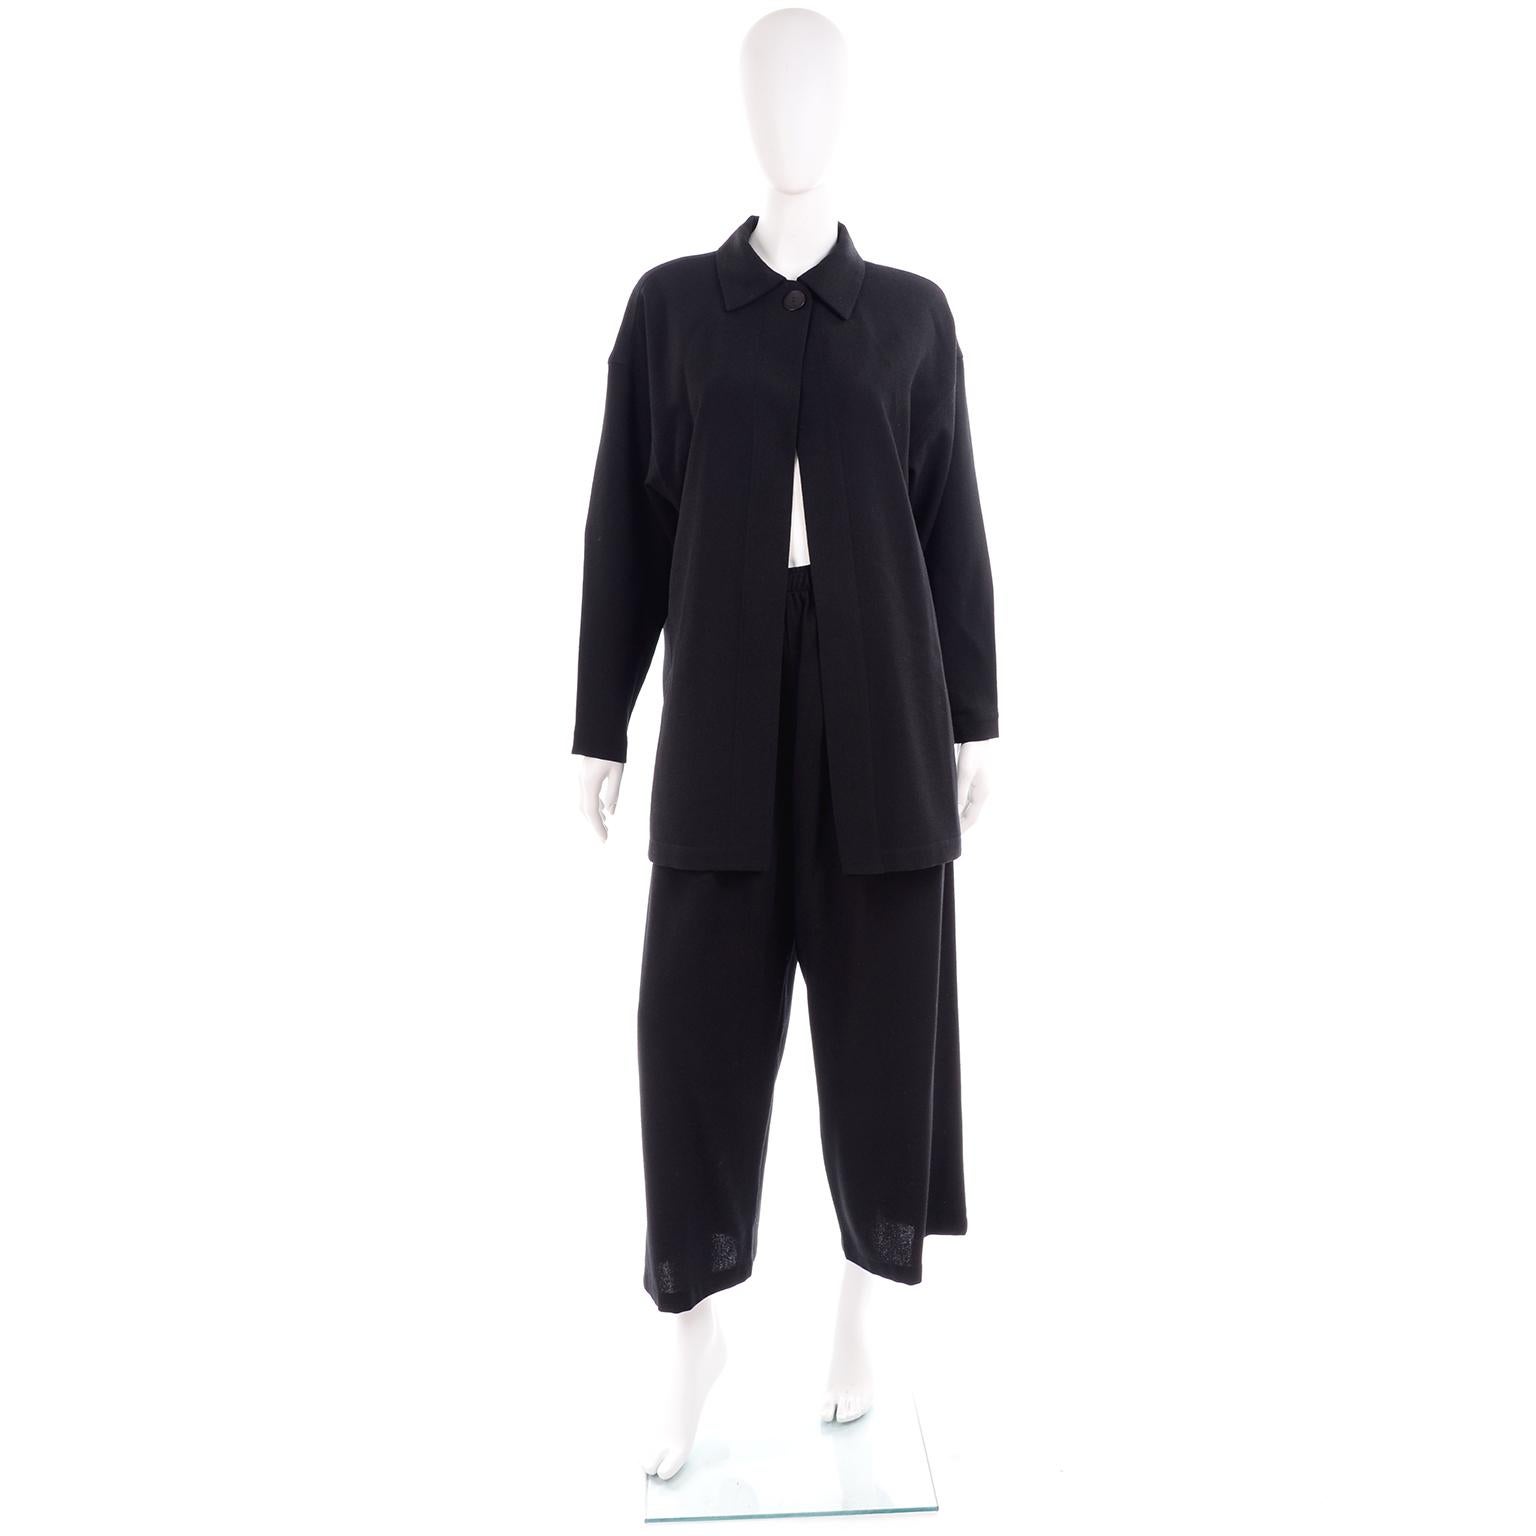 This is a fabulous vintage 1980's 2 piece spring/summer weight wool outfit from Opus 204 Seattle. Vija Rekevics opened Opus 204 in Seattle in the late 1960's. The clothing from her boutique that was highly coveted for its quality and forward